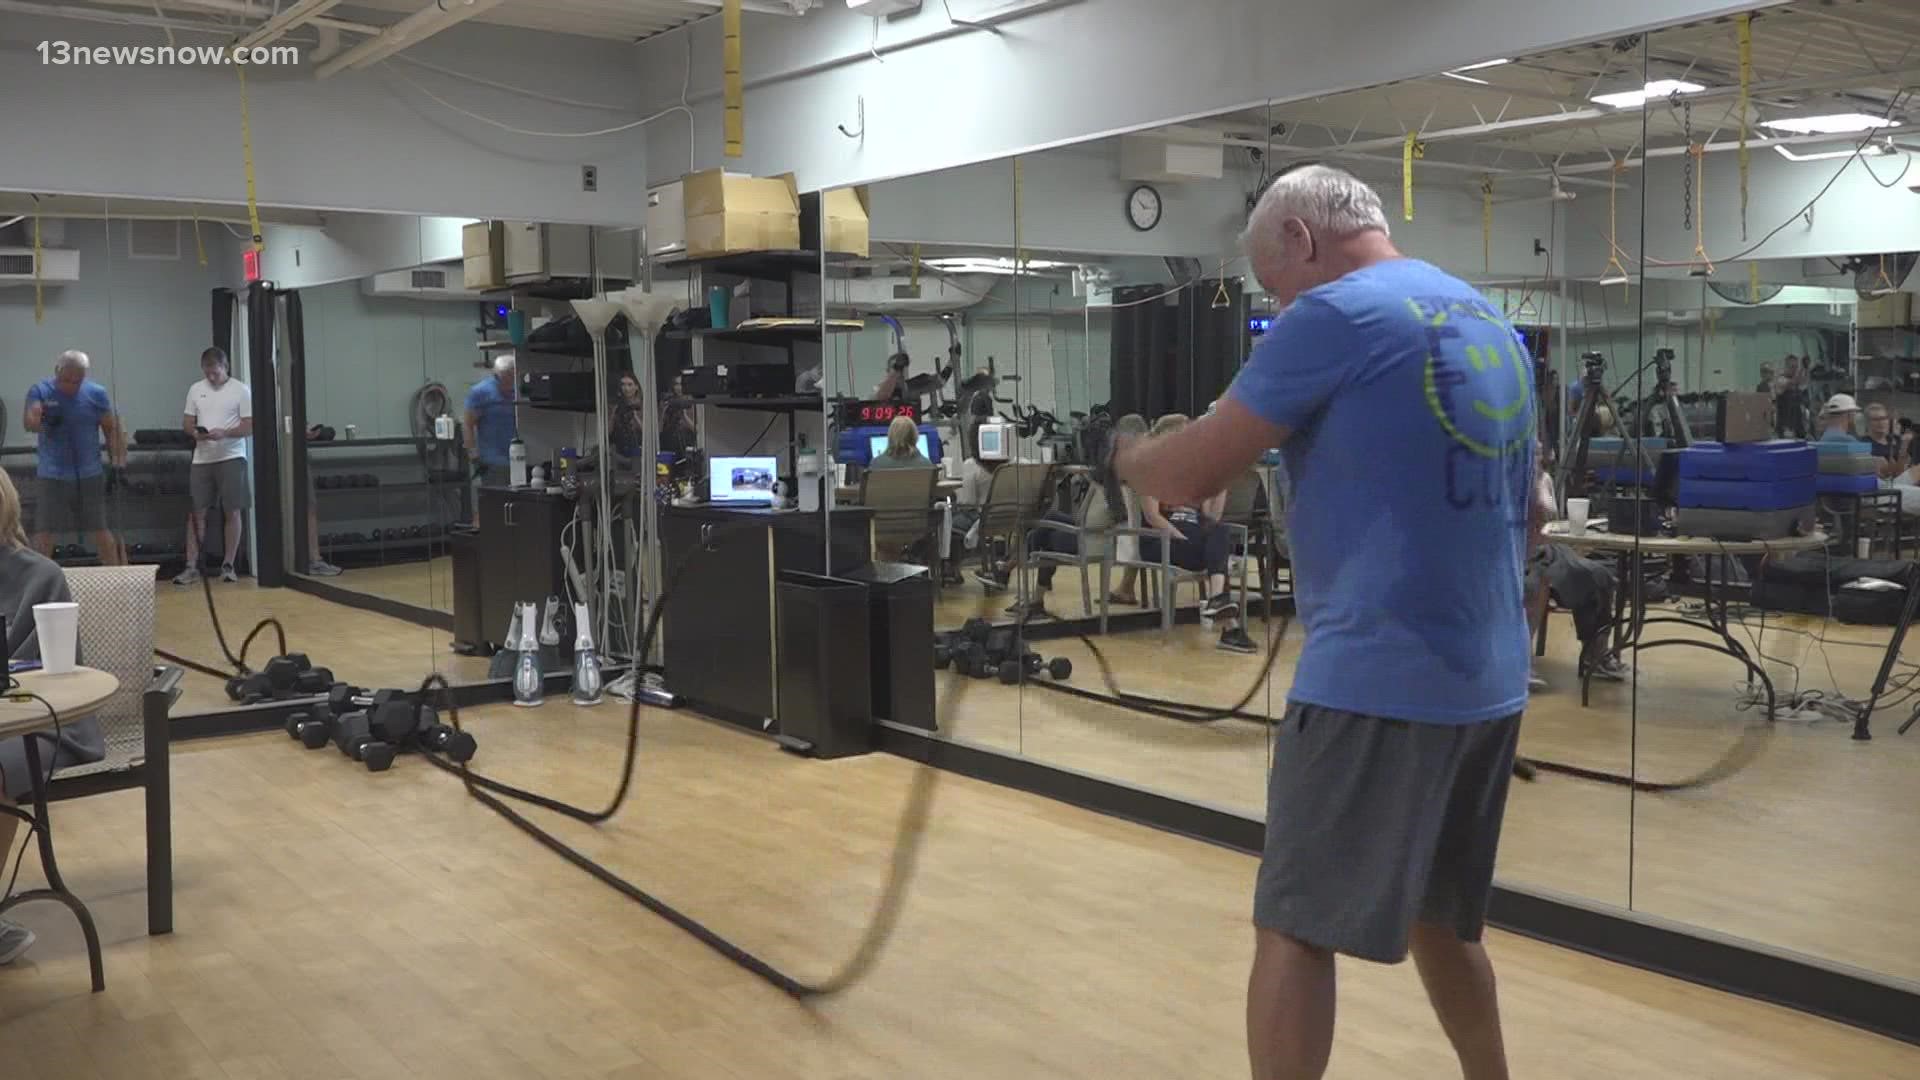 Rodney Hahn, 61, and Dave Stephens, 67, are proving they've still got it! They're trying to break two Guinness World Records to raise money for Alzheimer’s research.